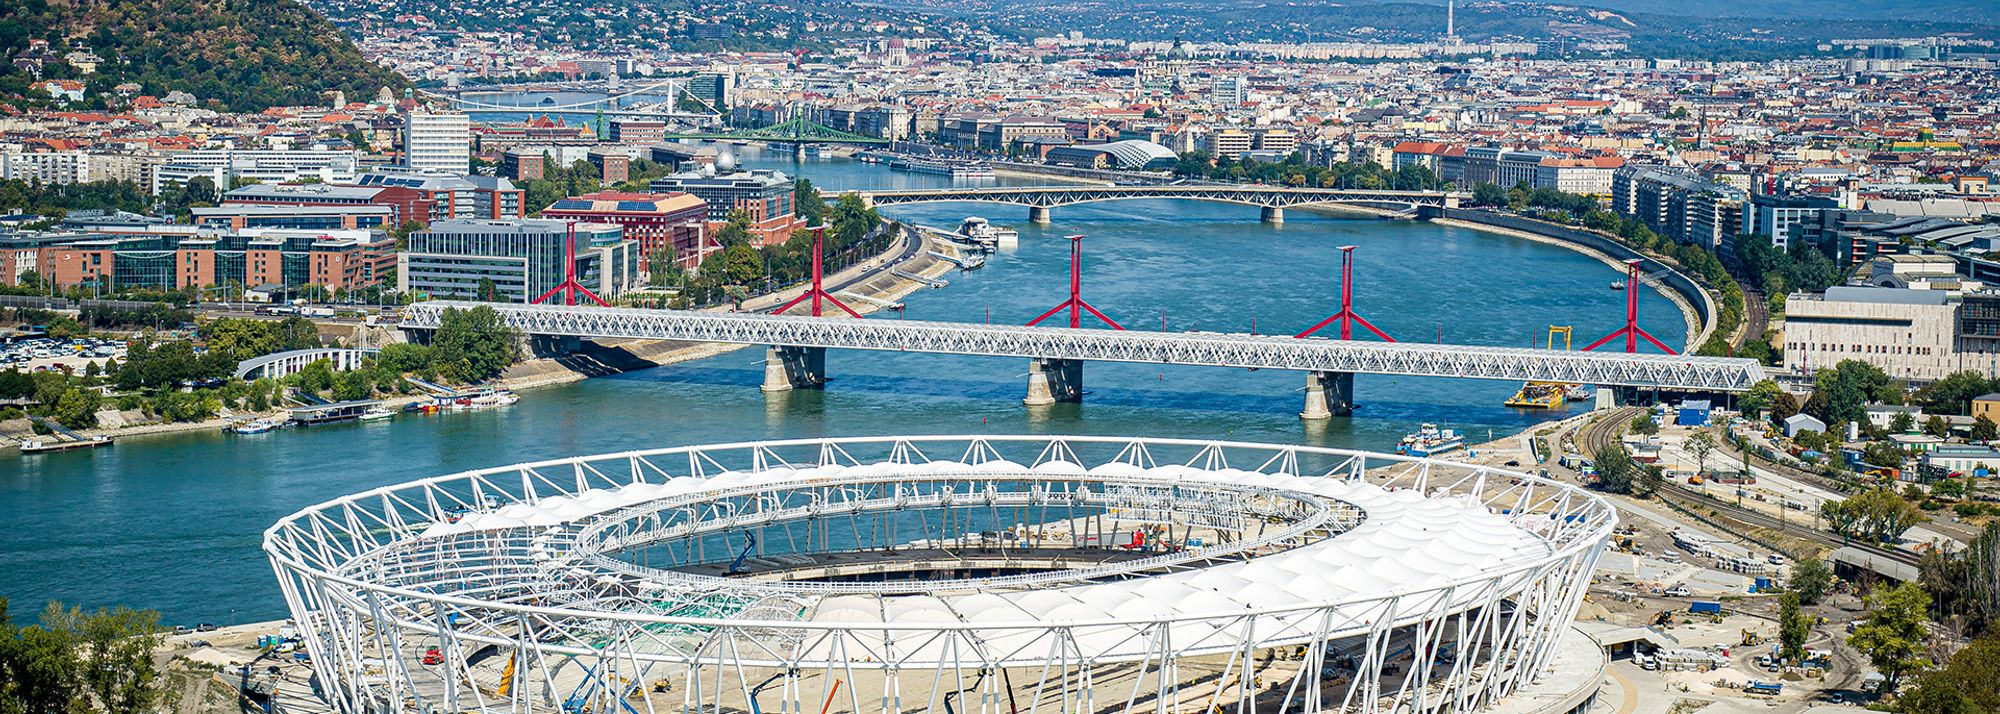 One year from now, the world will come together in Budapest, Hungary, to celebrate the pinnacle of athletics competition, the World Athletics Championships Budapest 23.